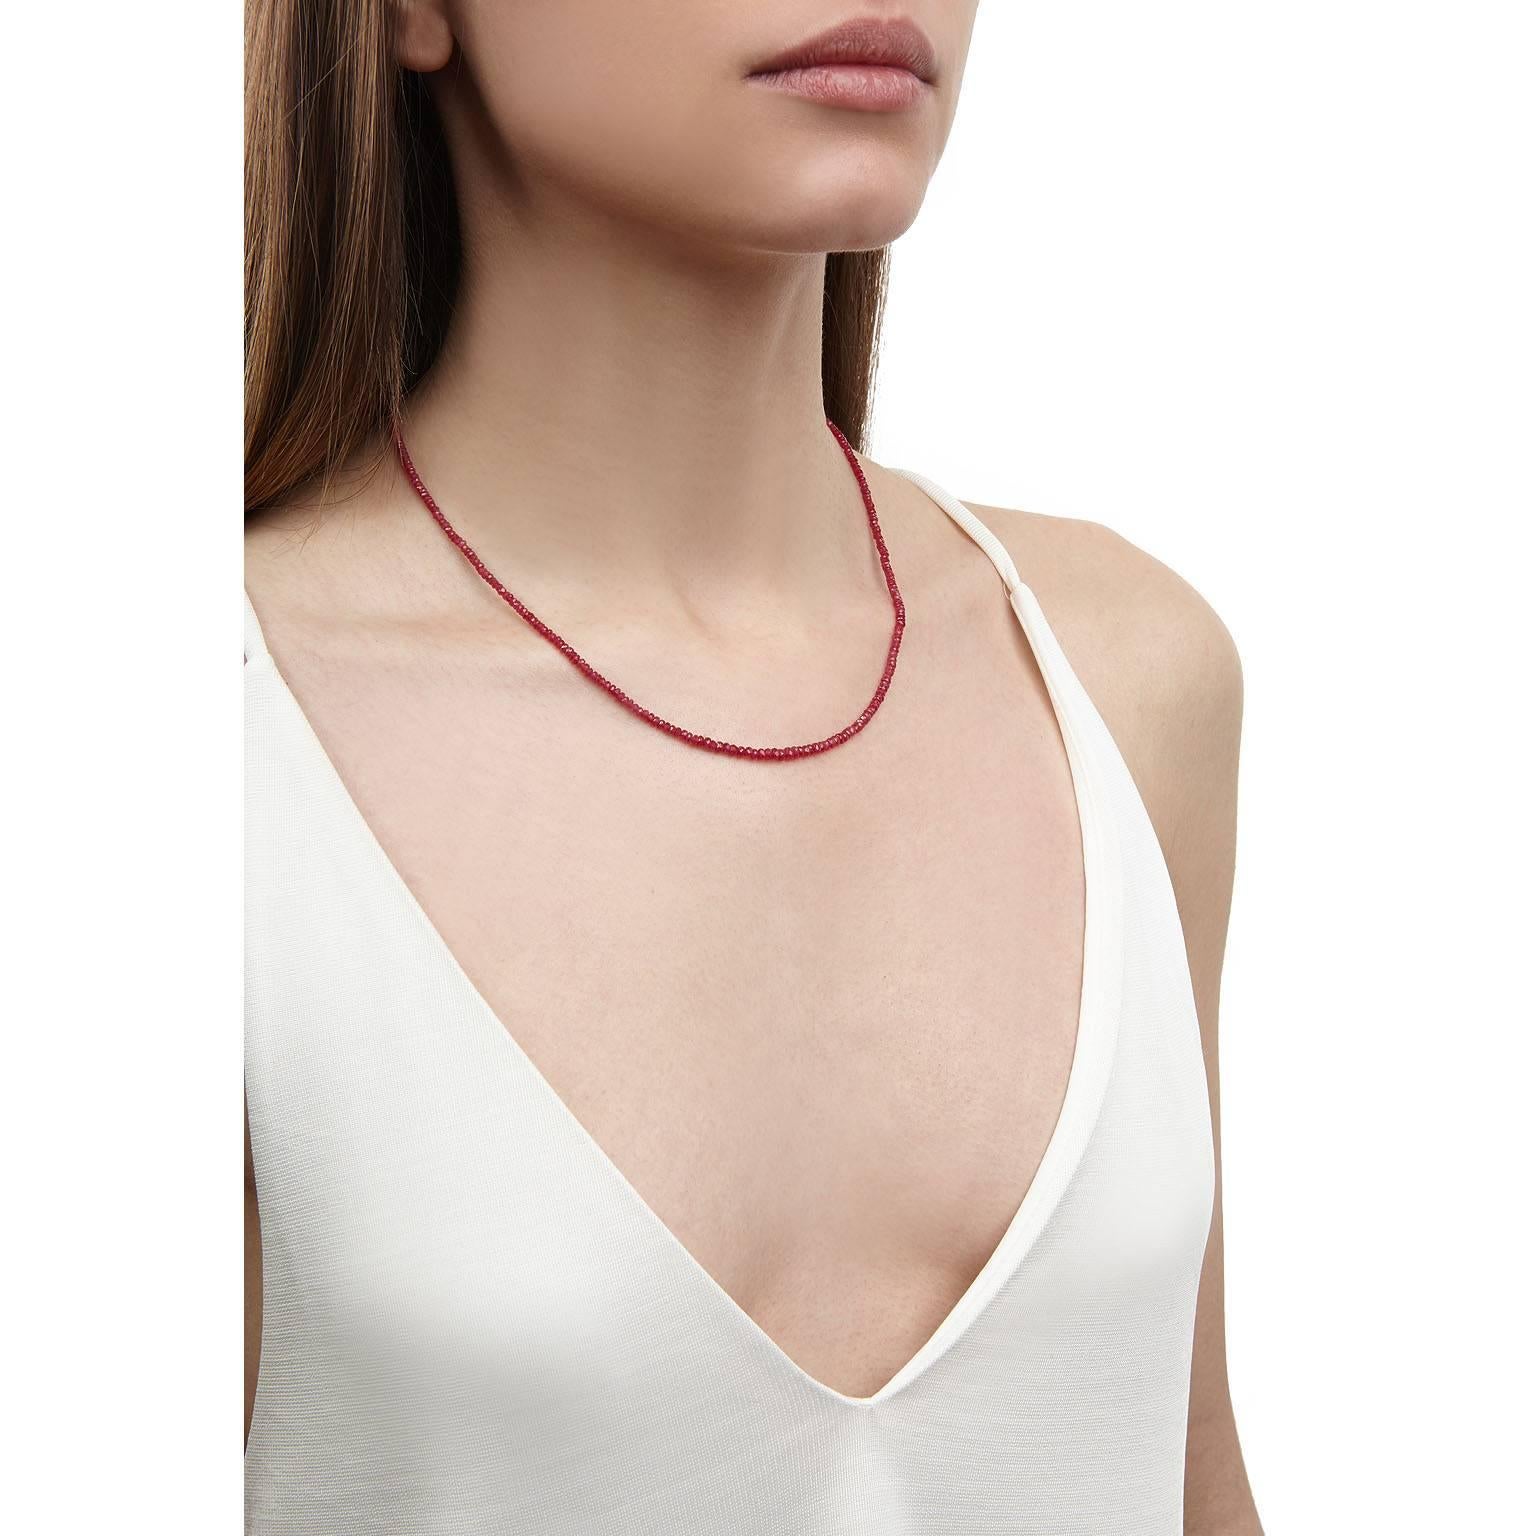 A beautifully strung necklace of faceted ruby beads, brings a subtle hit of colour to everyday outfits. Wear it on its own or layered with other necklaces for a more bohemian look. 

An innovative detail of this necklace is the clasp bearing